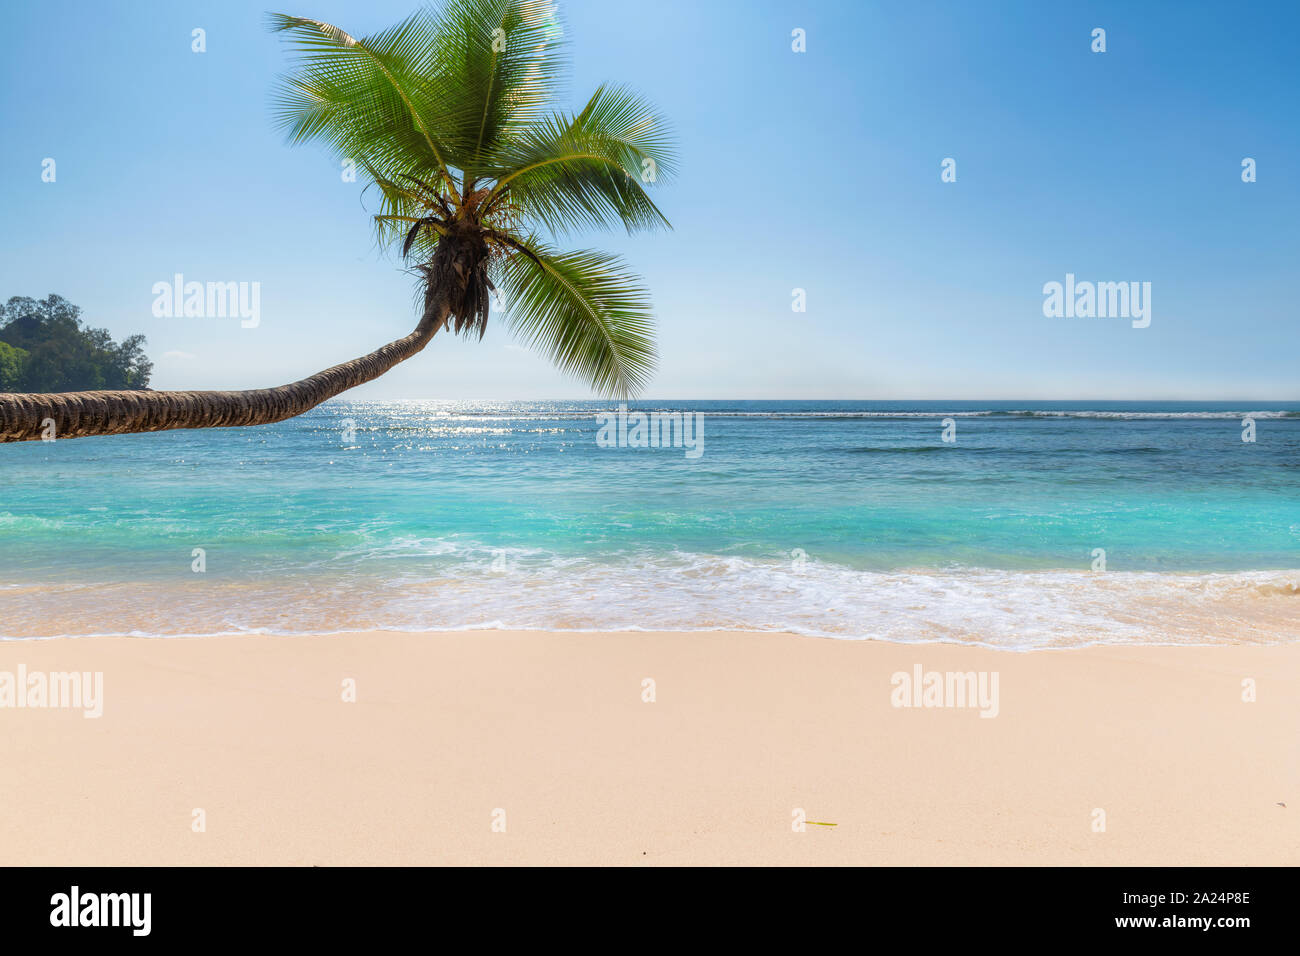 Coconut palm trees on over Sunny beach in tropical Stock Photo